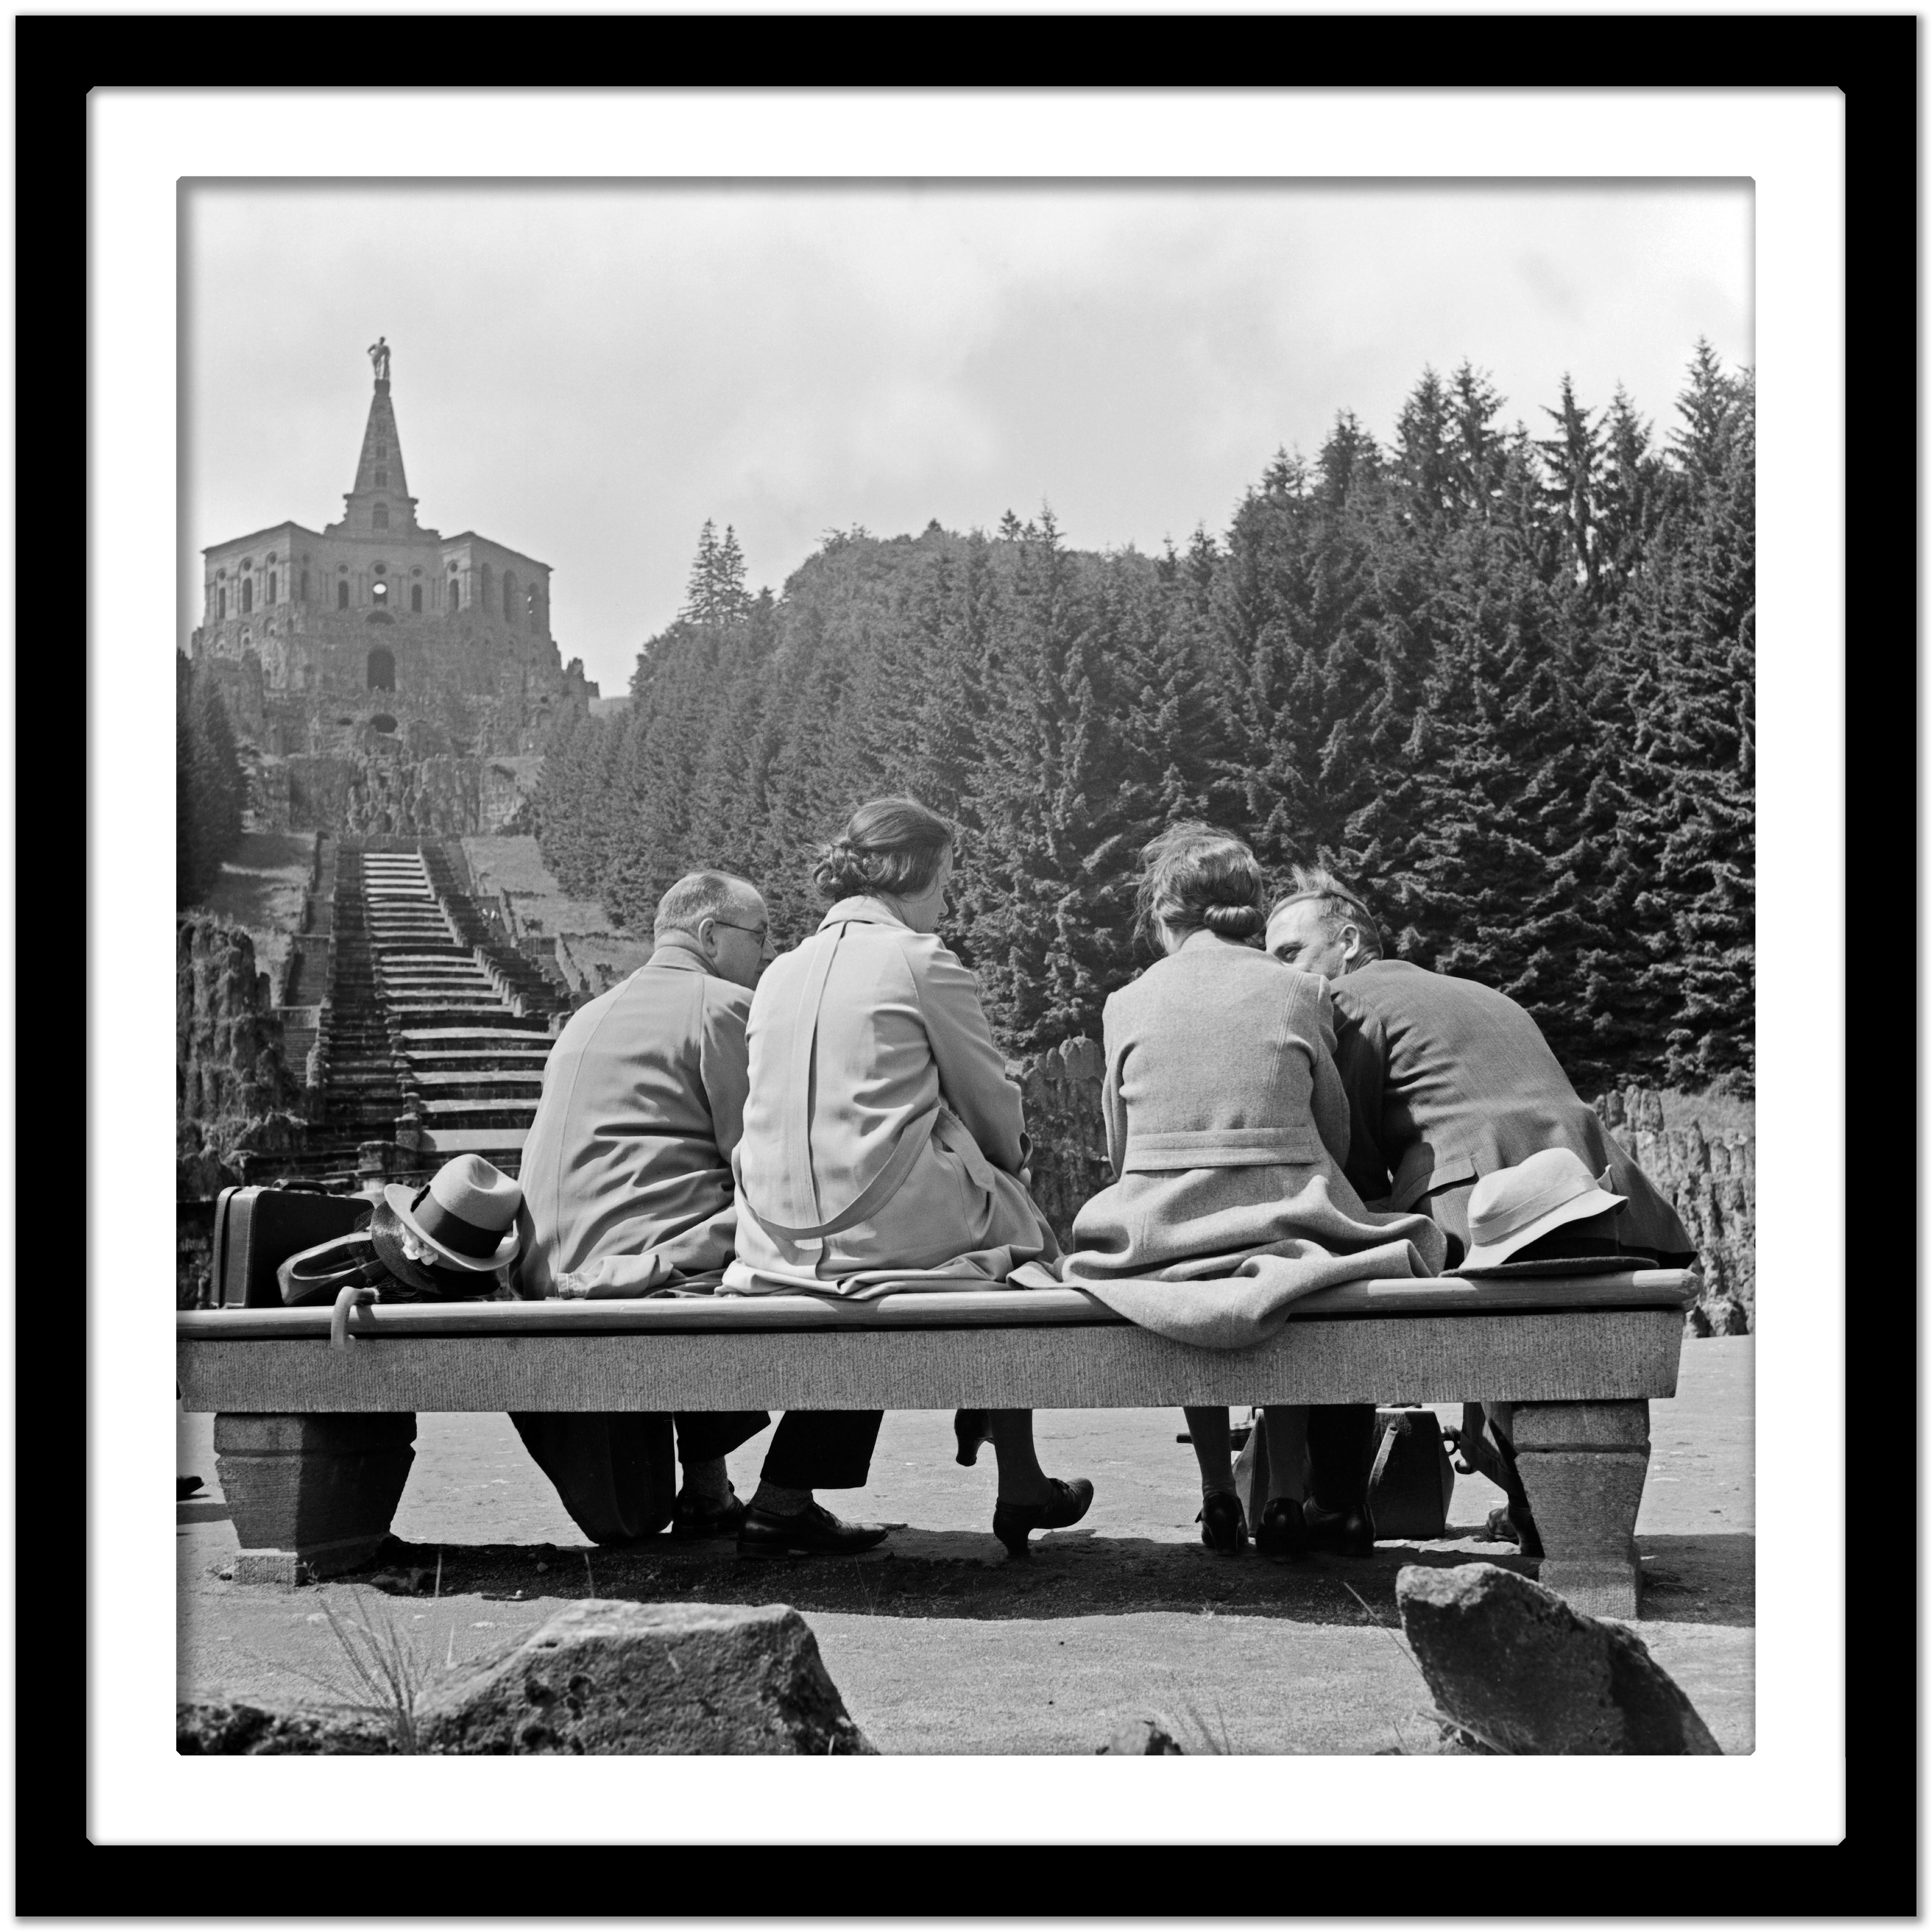 Couples on a bench in front of a statue in Kassel, Germany 1937 Printed Later - Gray Black and White Photograph by Karl Heinrich Lämmel